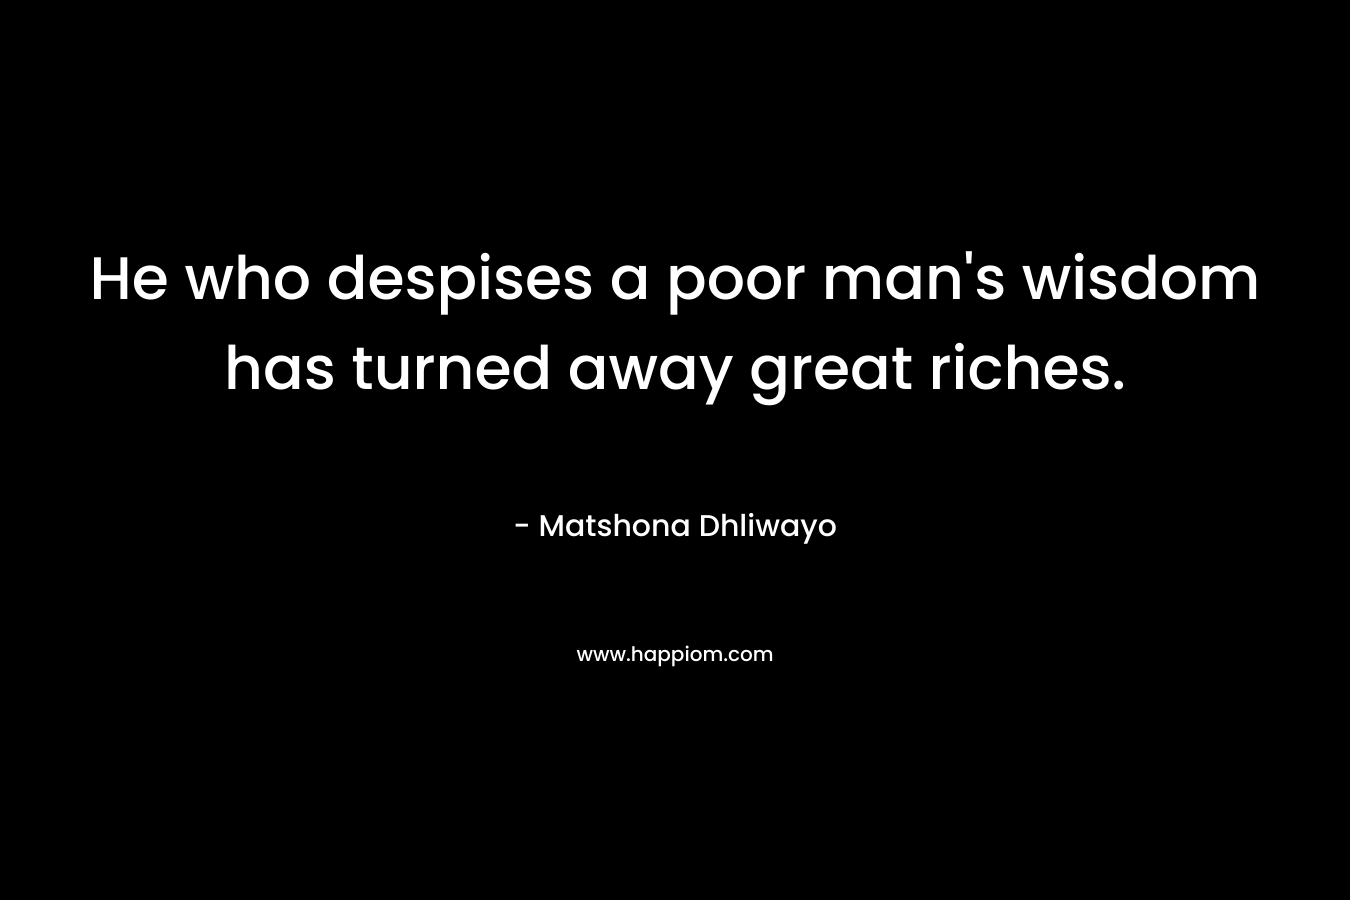 He who despises a poor man's wisdom has turned away great riches.